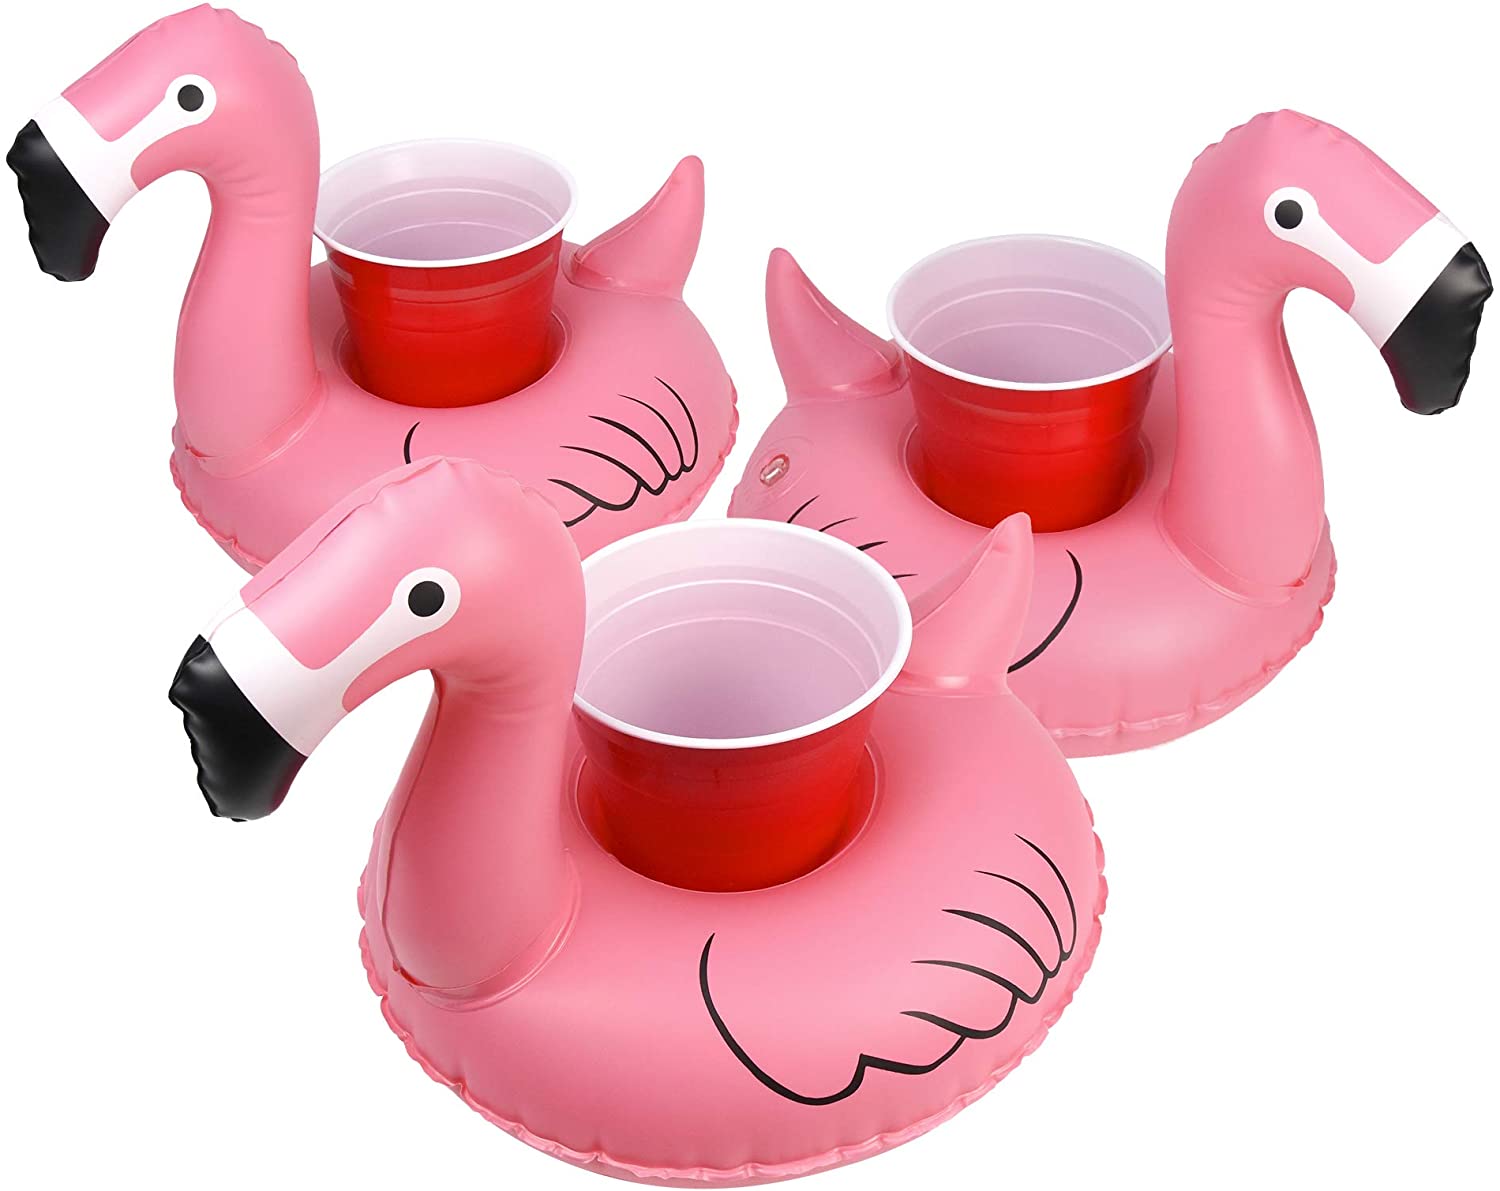 GoFloats Inflatable Pool Drink Holders (3 Pack) Designed in the US - Huge Selection from Unicorn, Flamingo, Palm and More - Float Your Hot Tub Drinks In Style